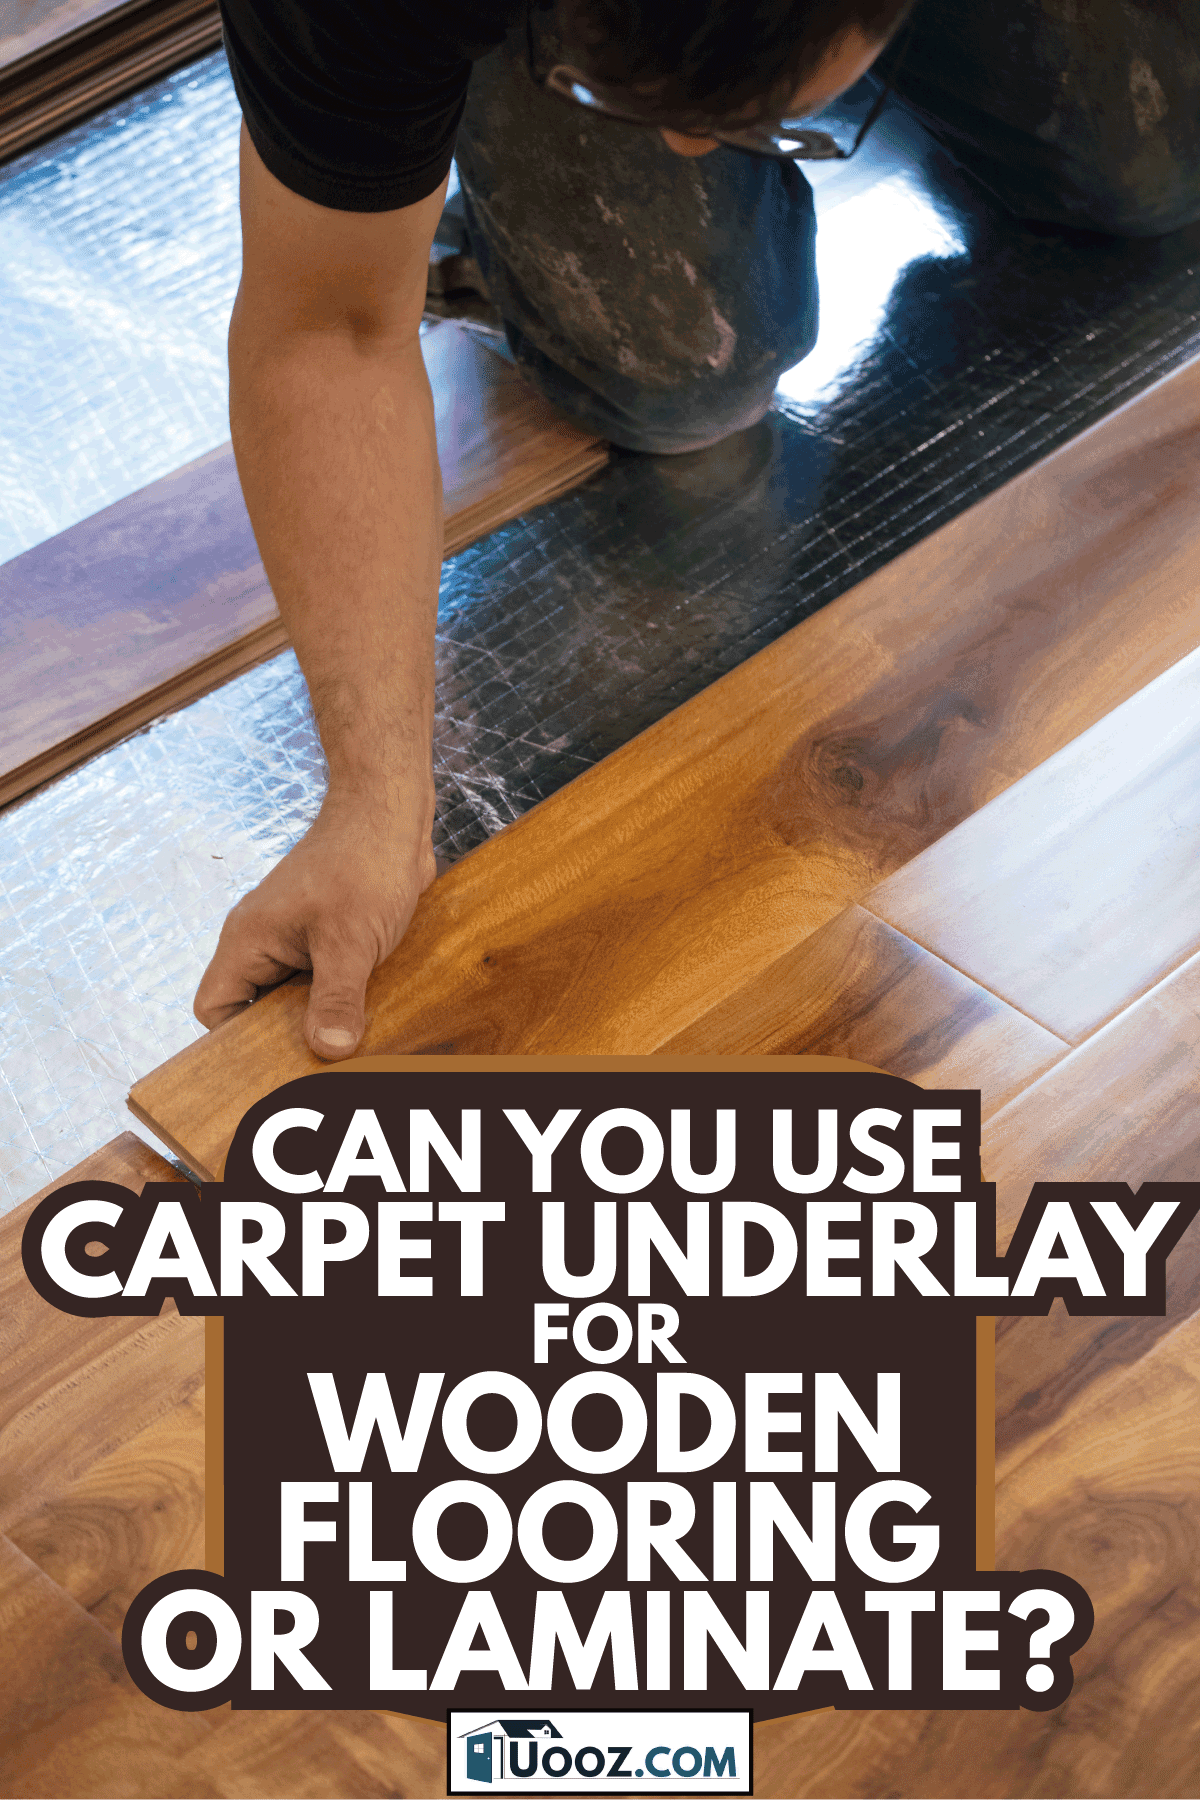 Man installing wood flooring in home. Can You Use Carpet Underlay For Wooden Flooring Or Laminate